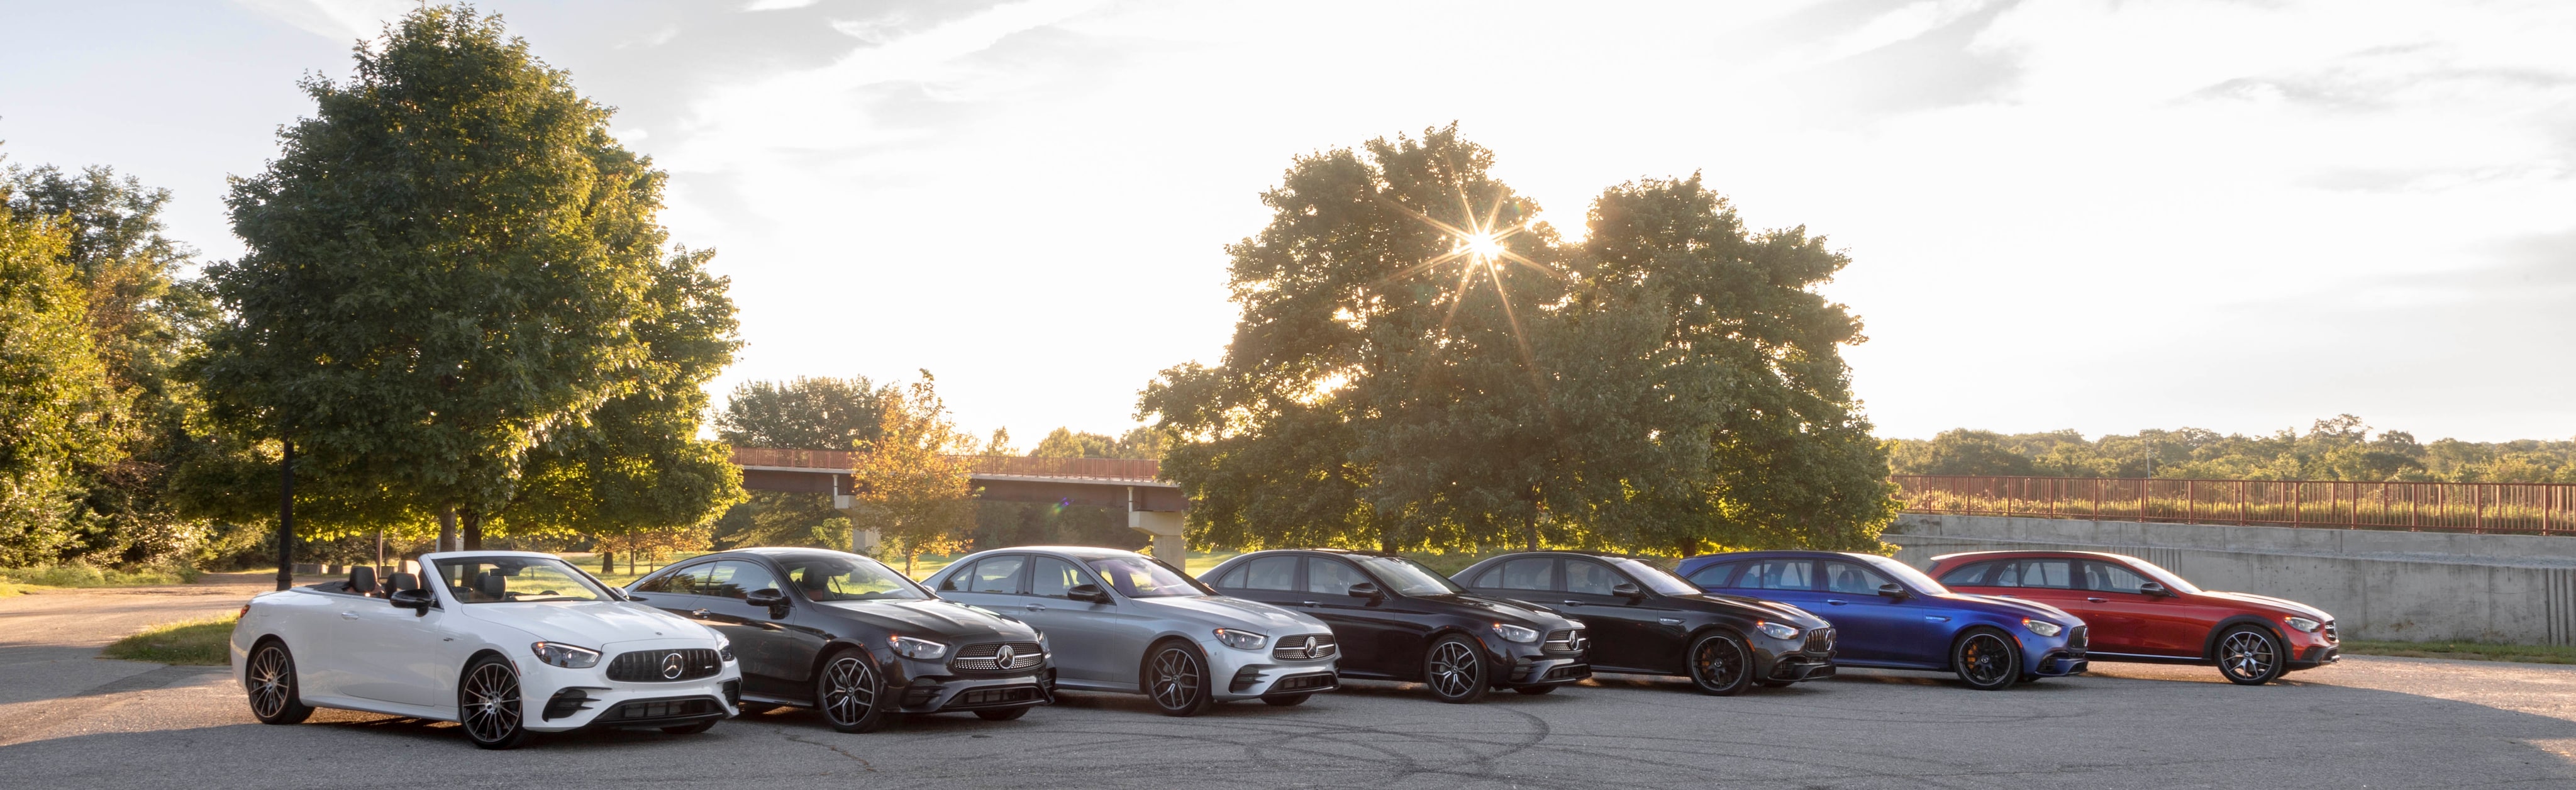 Seven Mercedes-Benz vehicles parked
alongside each other outside on a sunny day